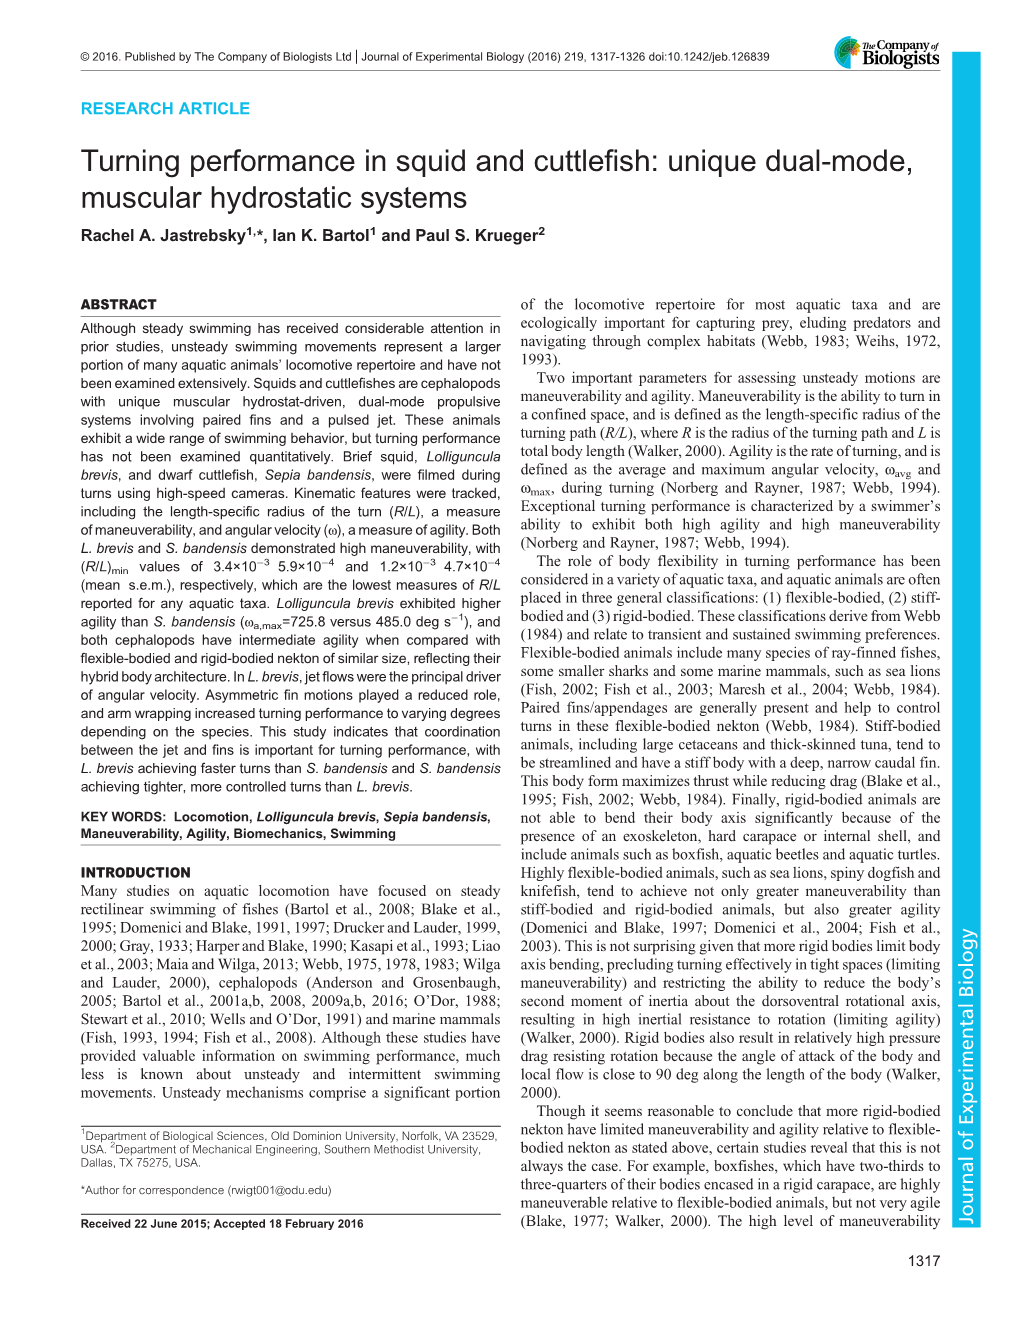 Turning Performance in Squid and Cuttlefish: Unique Dual-Mode, Muscular Hydrostatic Systems Rachel A